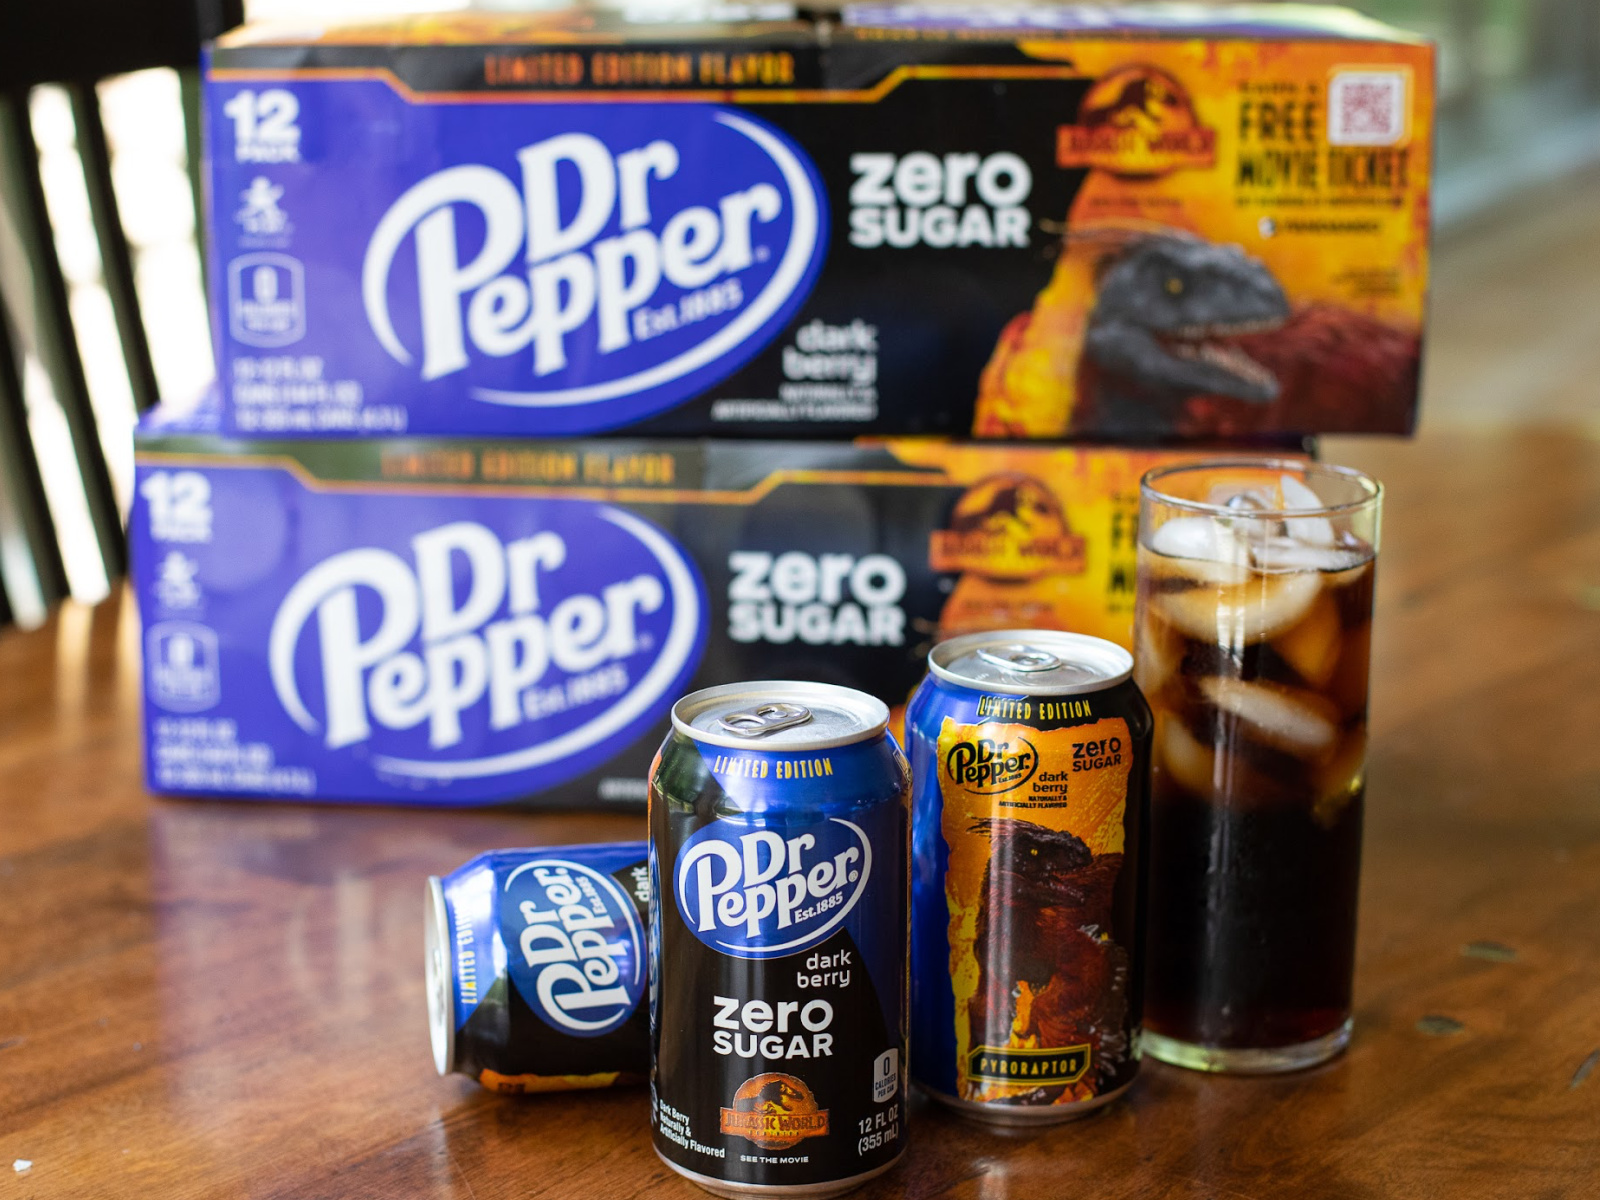 Get Saving On Dr Pepper At Publix + Sweepstakes Reminder!